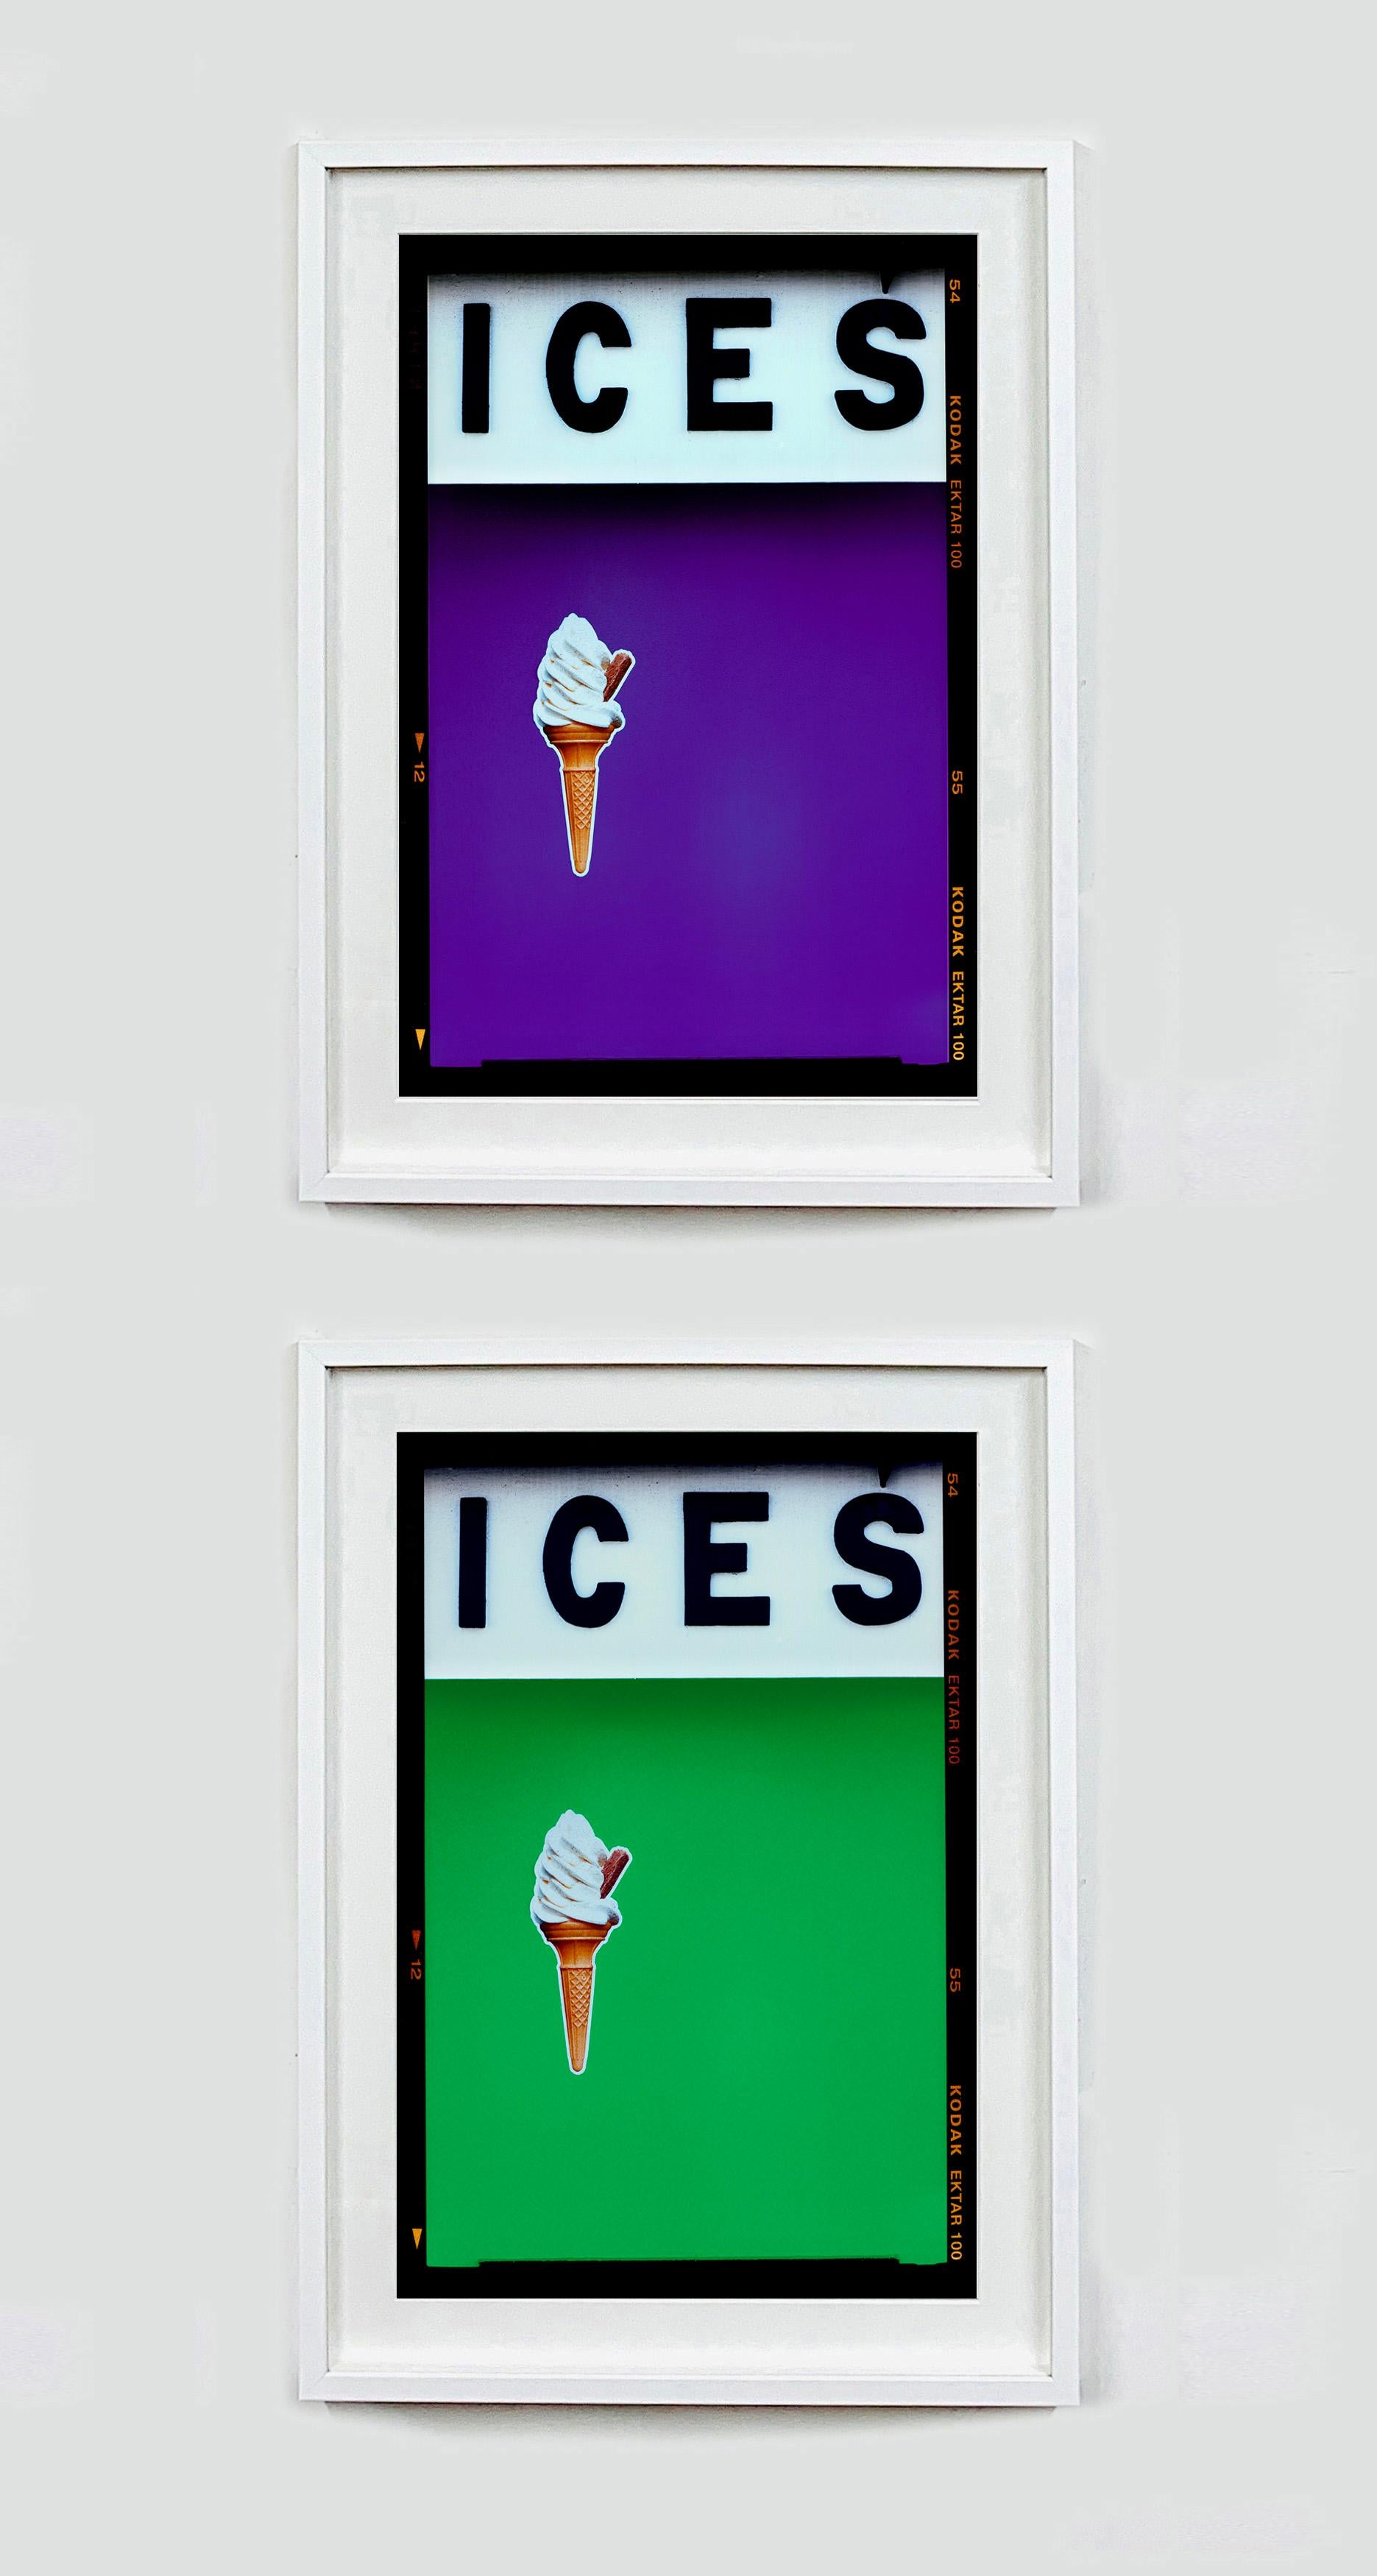 ICES, by Richard Heeps, photographed at the British Seaside at the end of summer 2020. This artwork is about evoking memories of the simple joy of days by the beach. The deep purple color blocking, typography and the surreal twist of the suspended